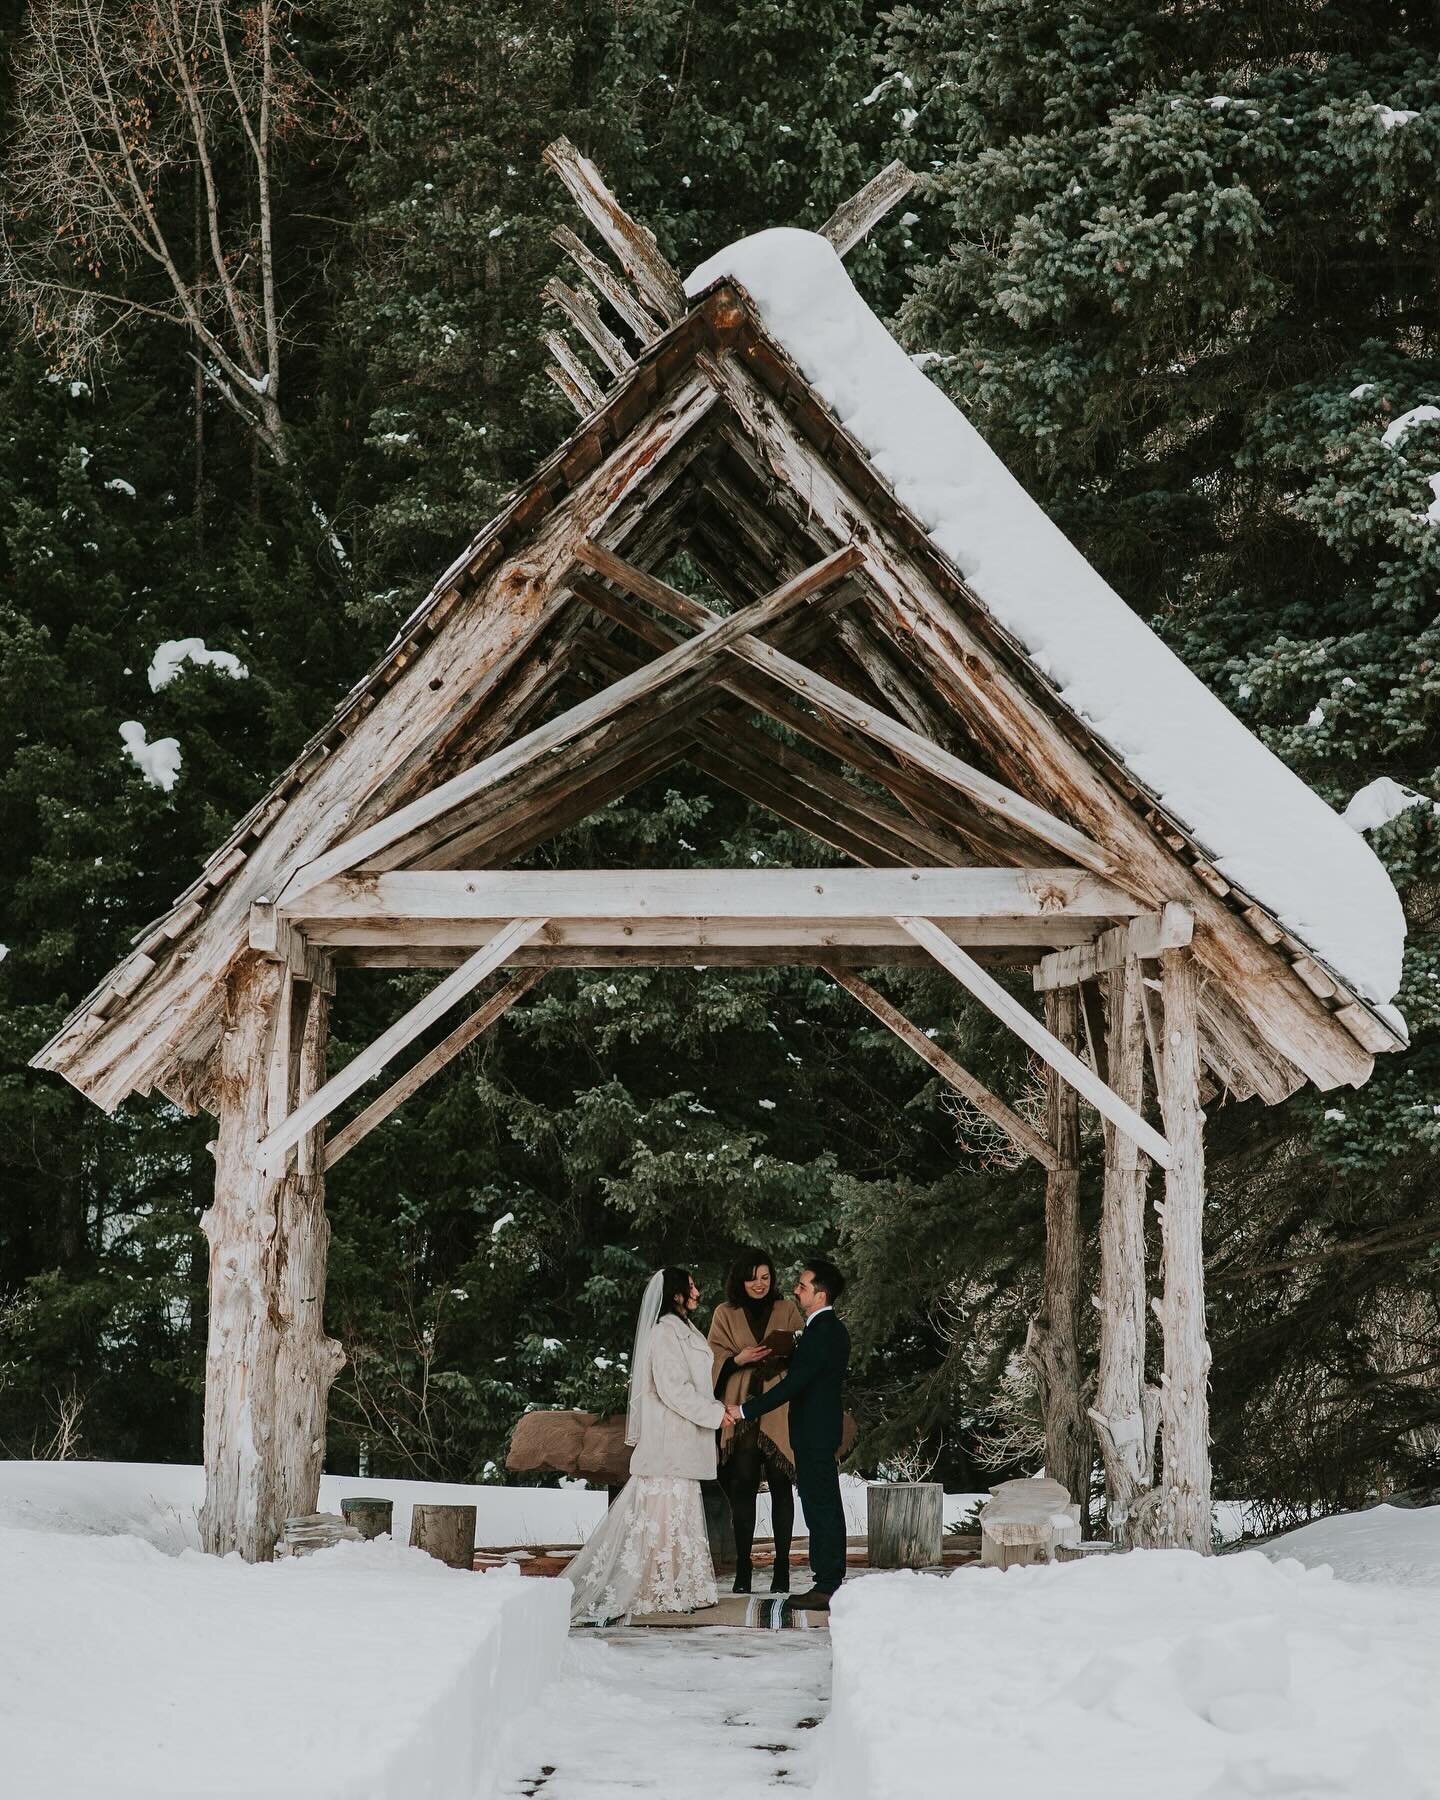 A perfect, snowy elopement with Andrea and Kenji at one of the dreamiest locations in Colorado 🤍 

#coloradoelopement #coloradoelopementphotographer #elopementphotographer #coloradoweddingvenues #coloradophotographer #gethitched